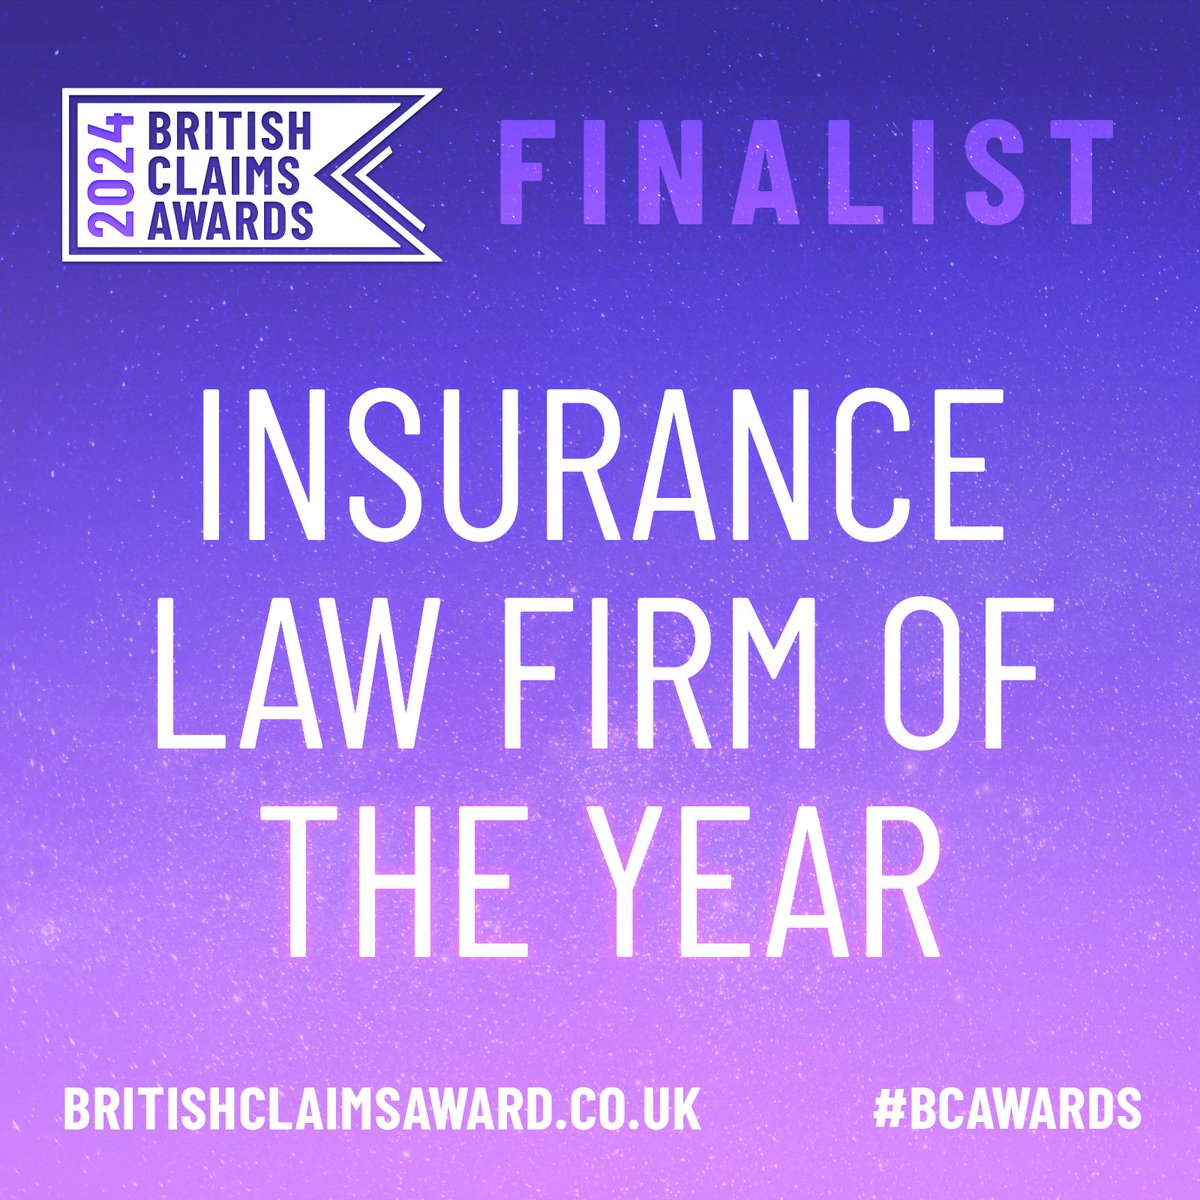 Edwin Coe's Insurance Litigation Team has been nominated as a finalist for the British Claims Awards for the Insurance Law firm of the Year category. Congratulations and good luck team! #BCAwards #insuranceligitation #claims #insurance